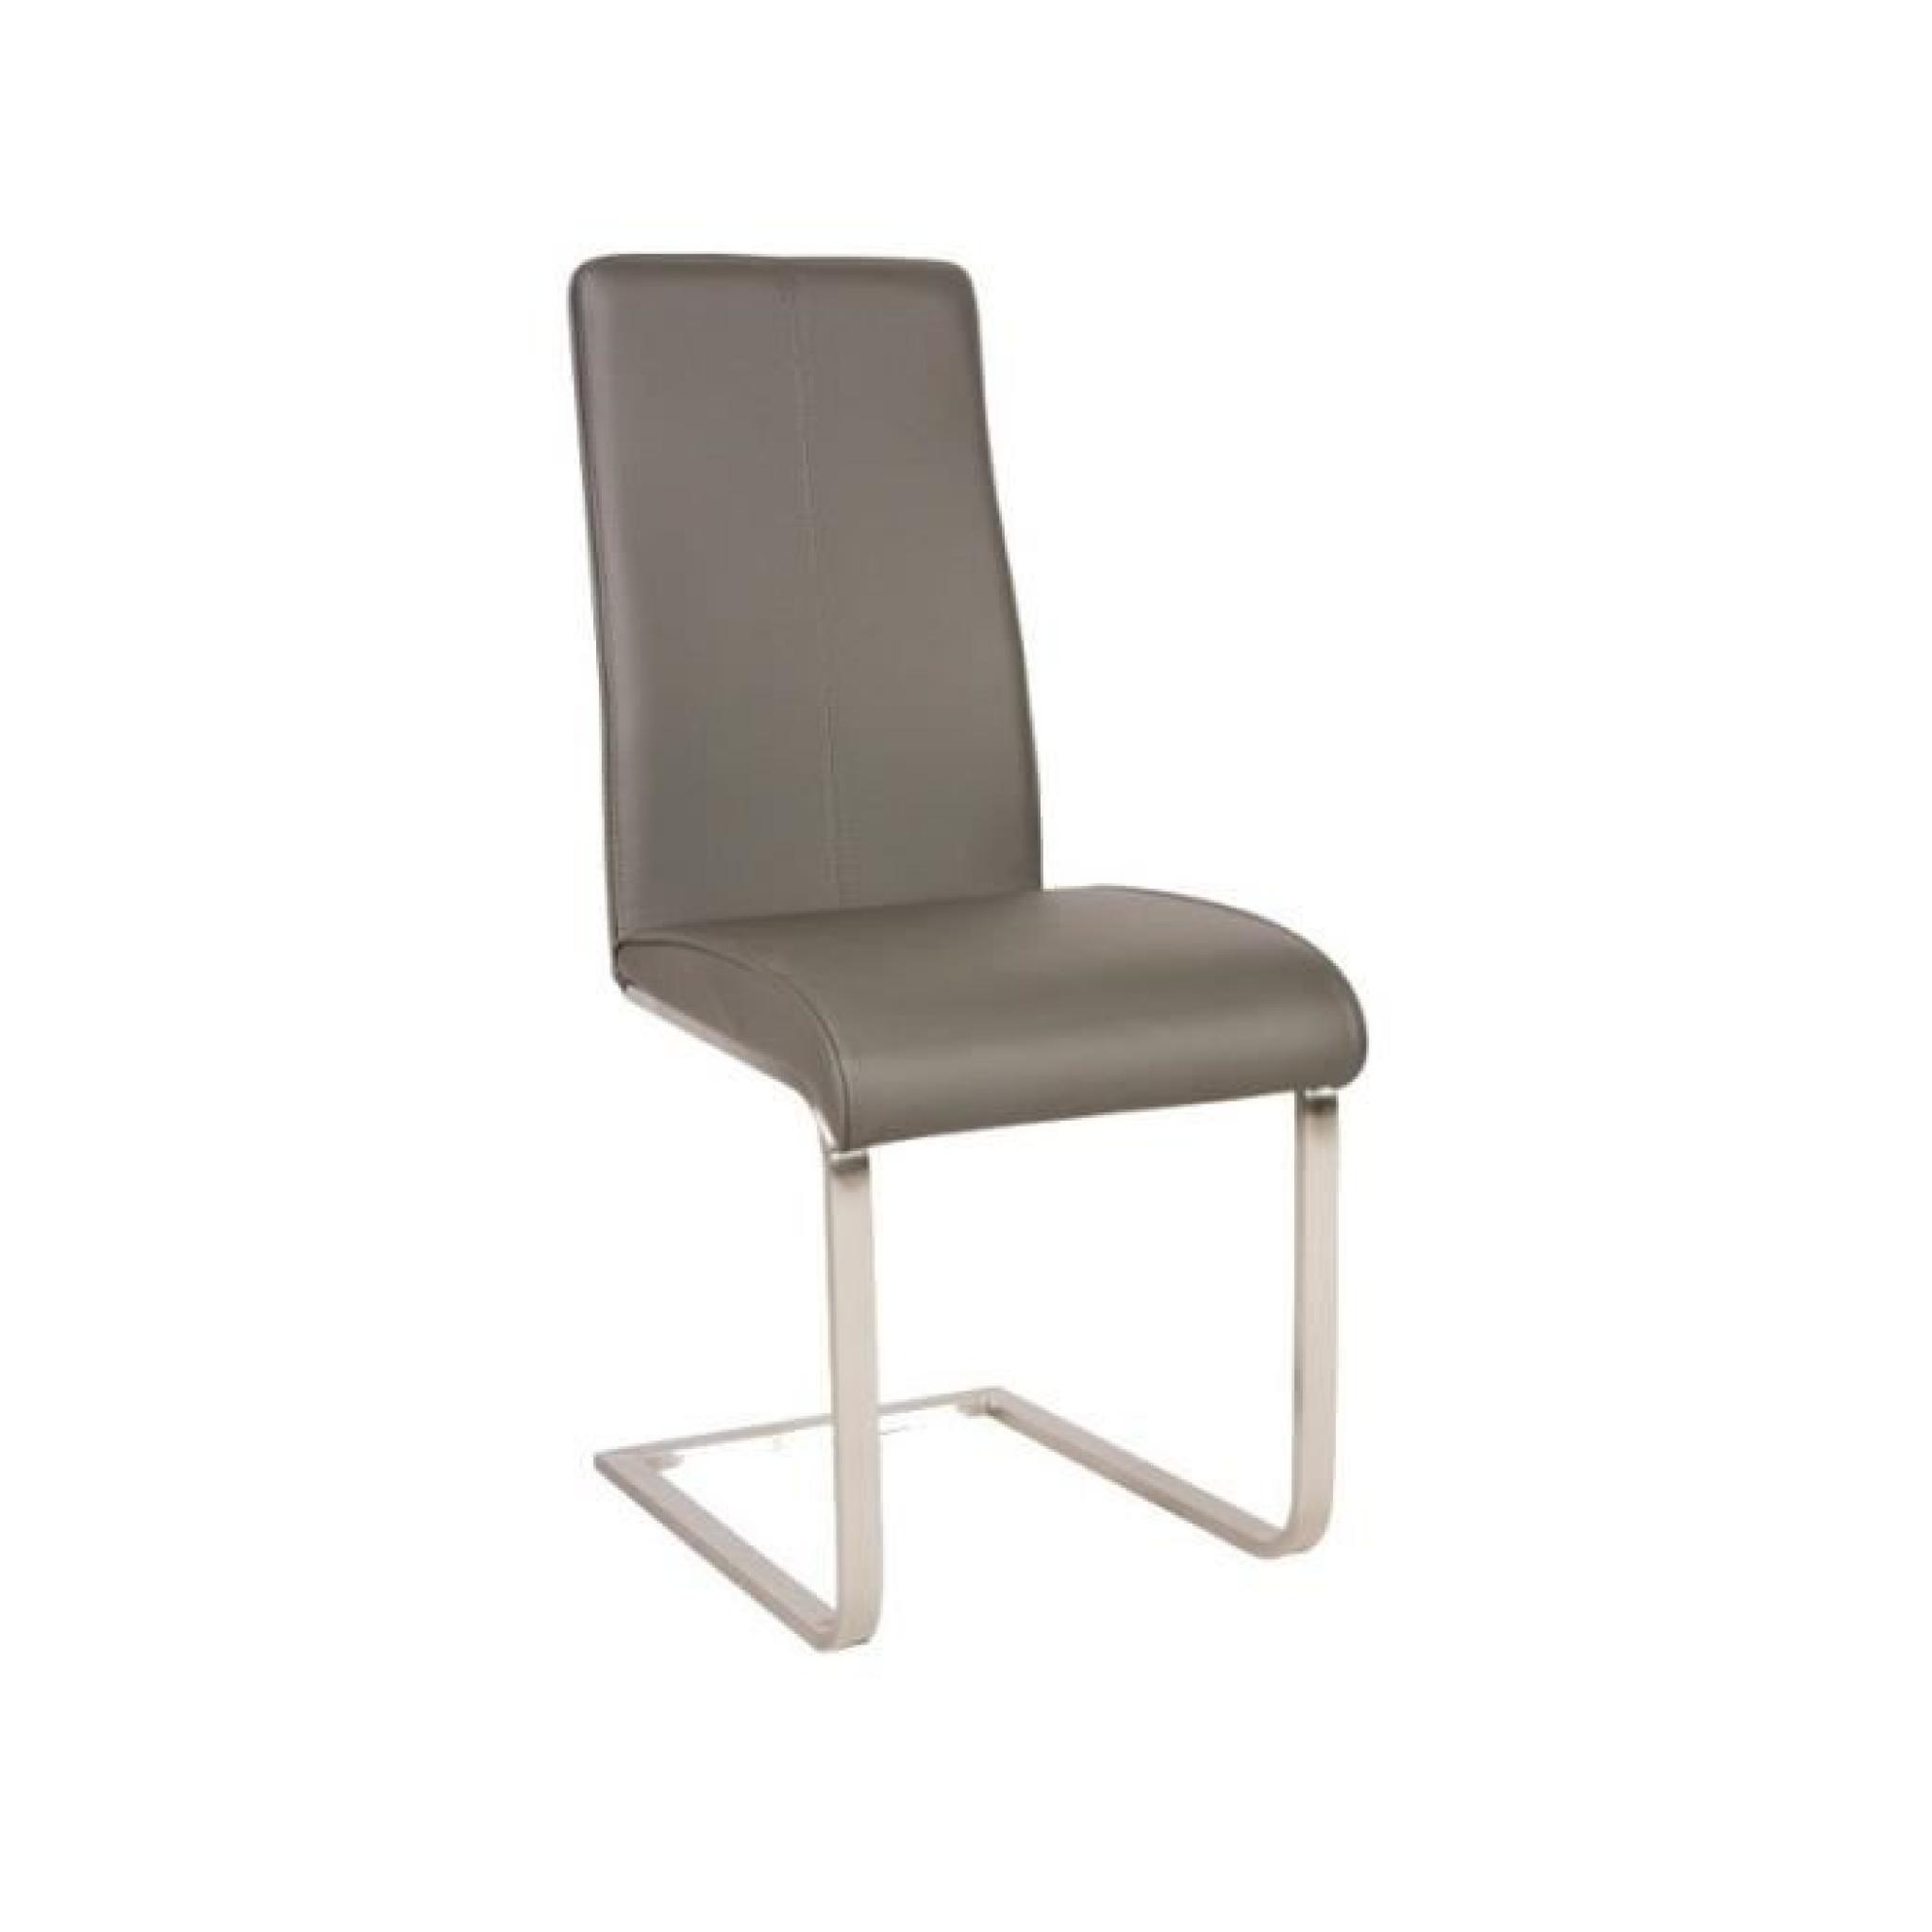 JUSThome H-856 Chaise Gris 100 x 42 x 44